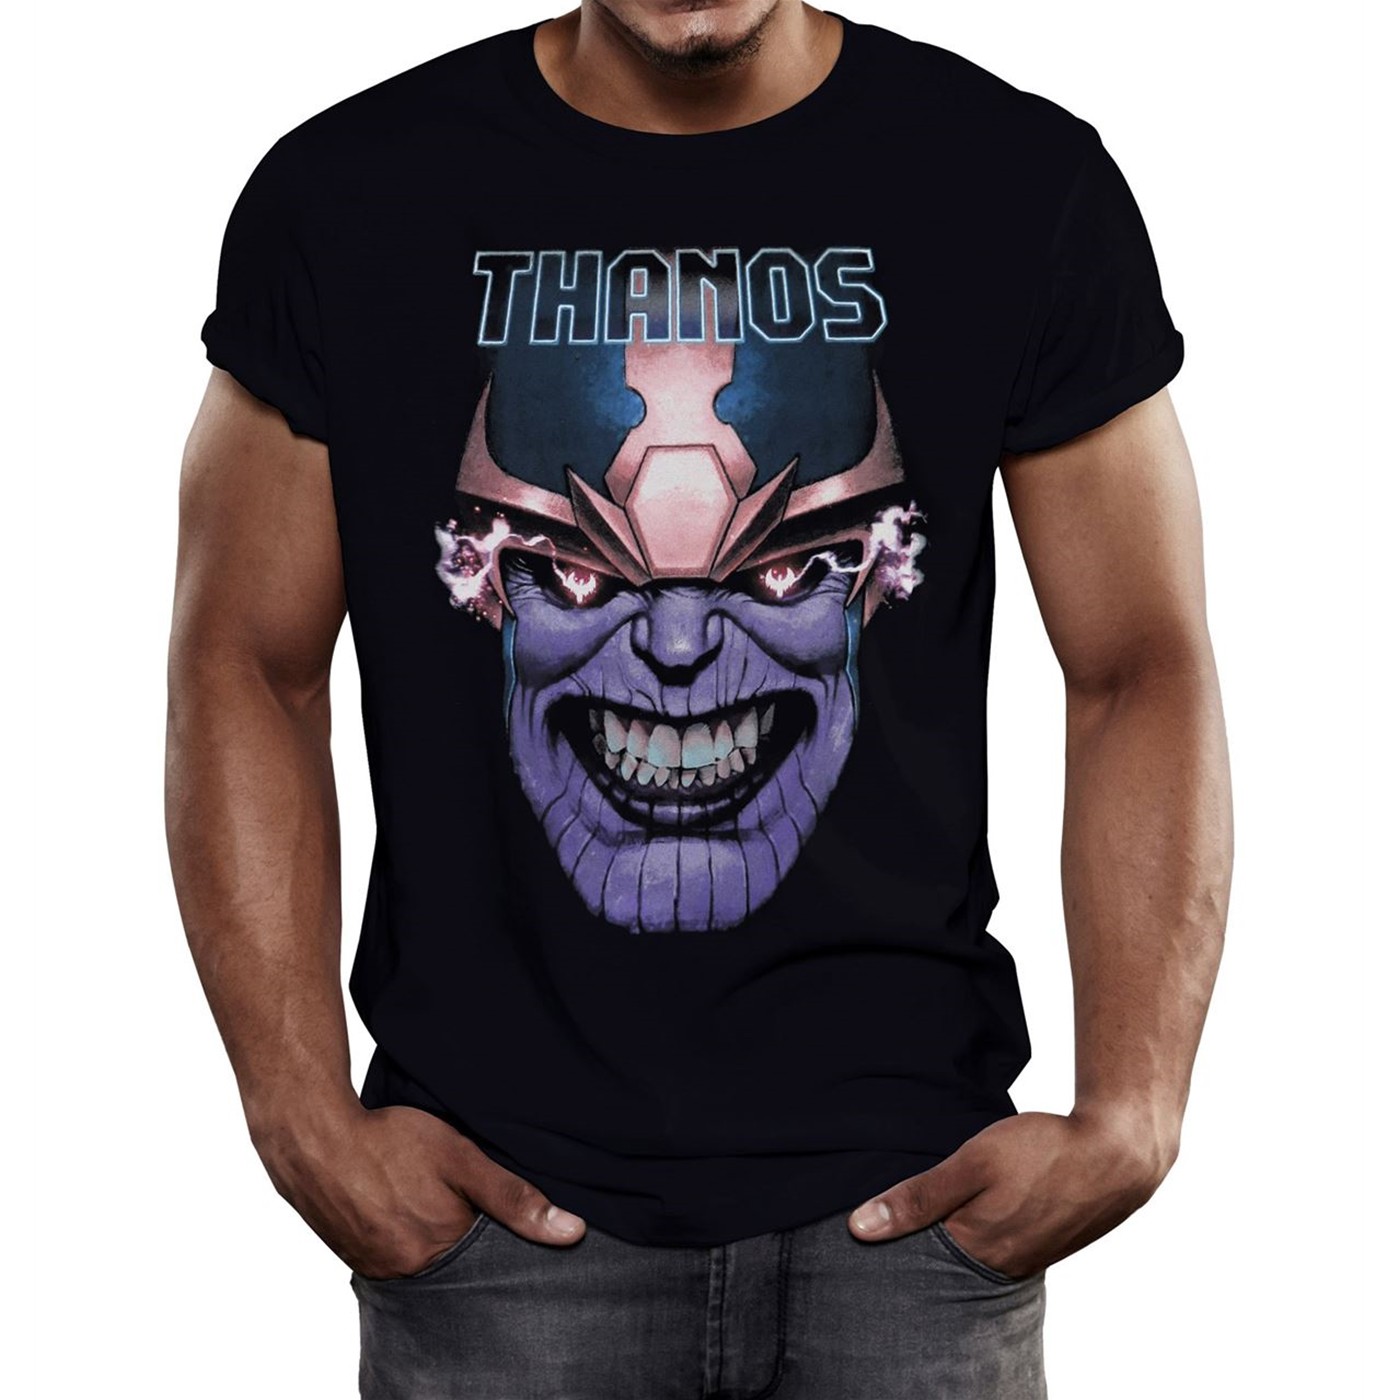 Thanos Teeth Clenched Men's T-Shirt